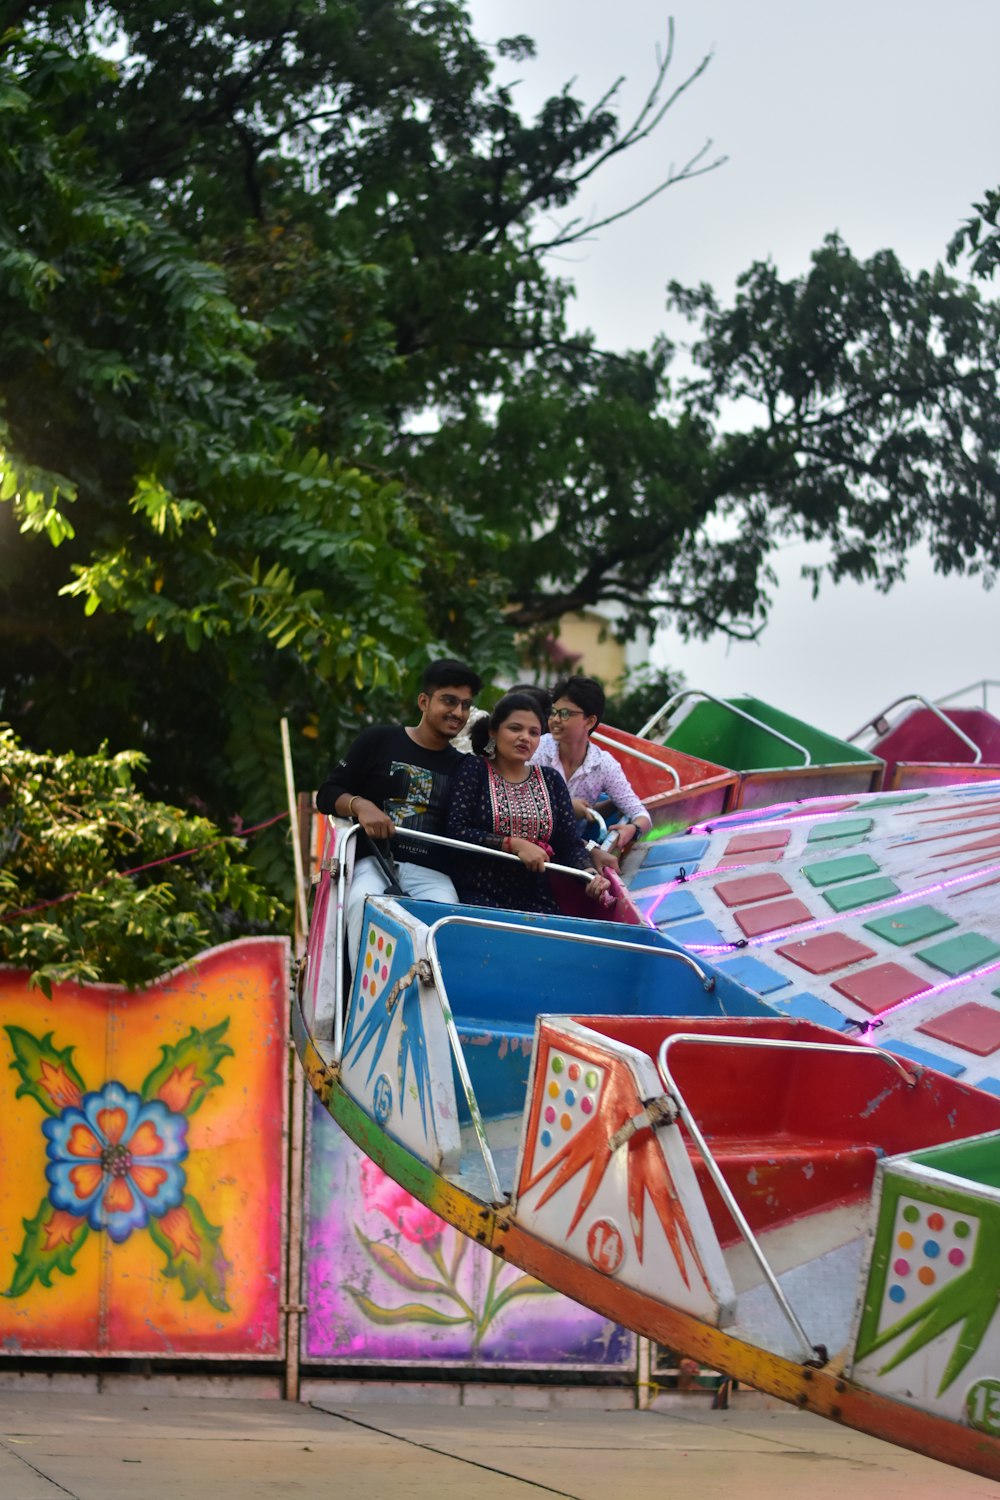 a group of people on a ride